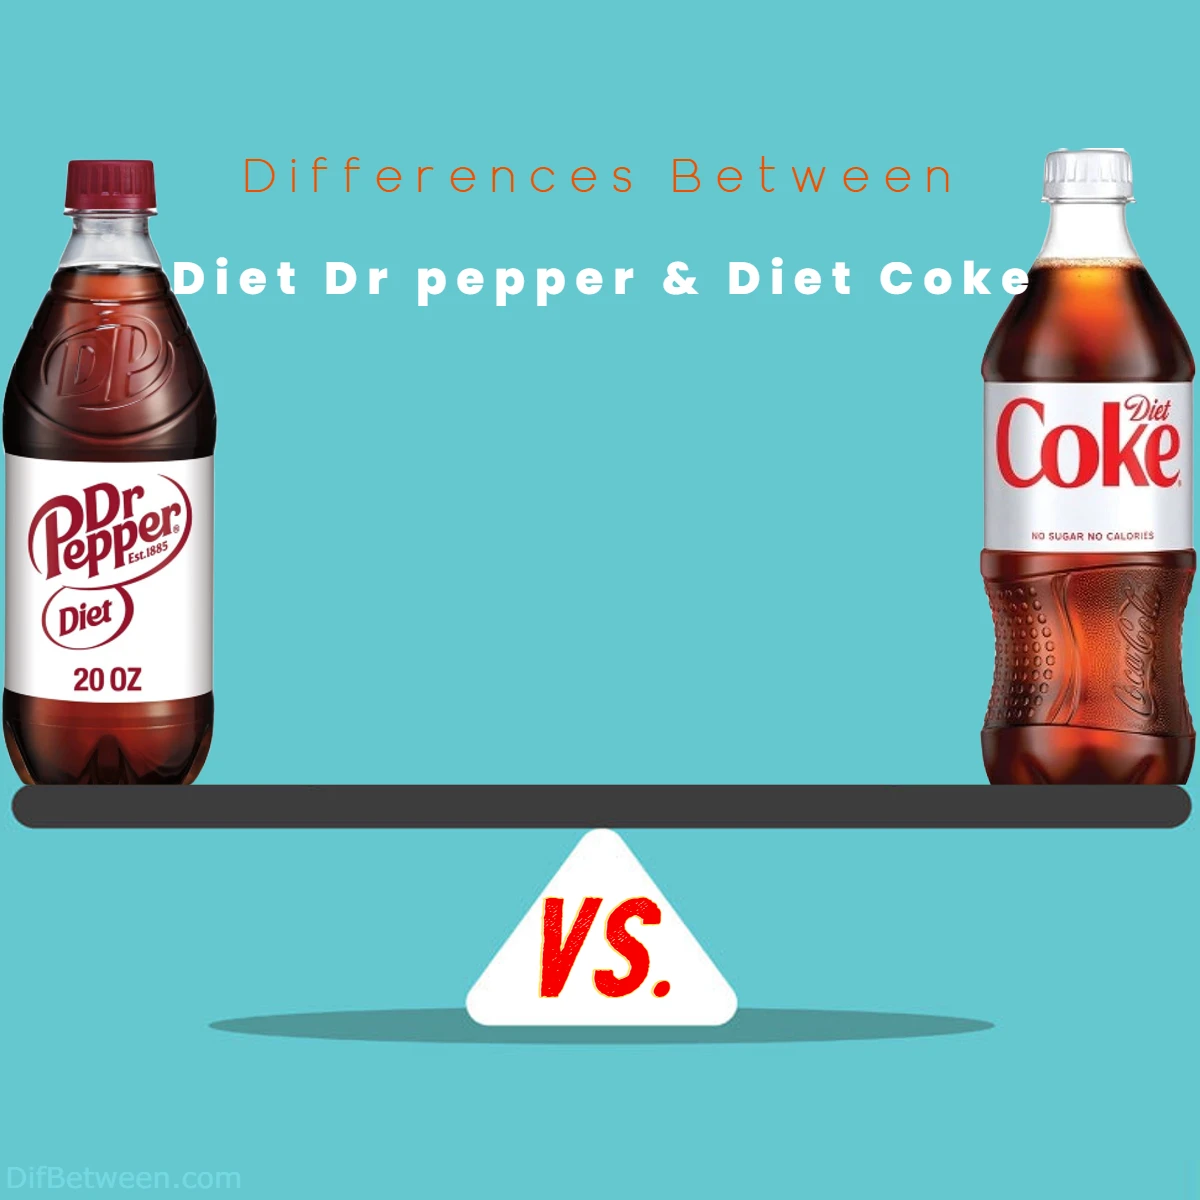 Differences Between Diet Coke and Diet Dr Pepper